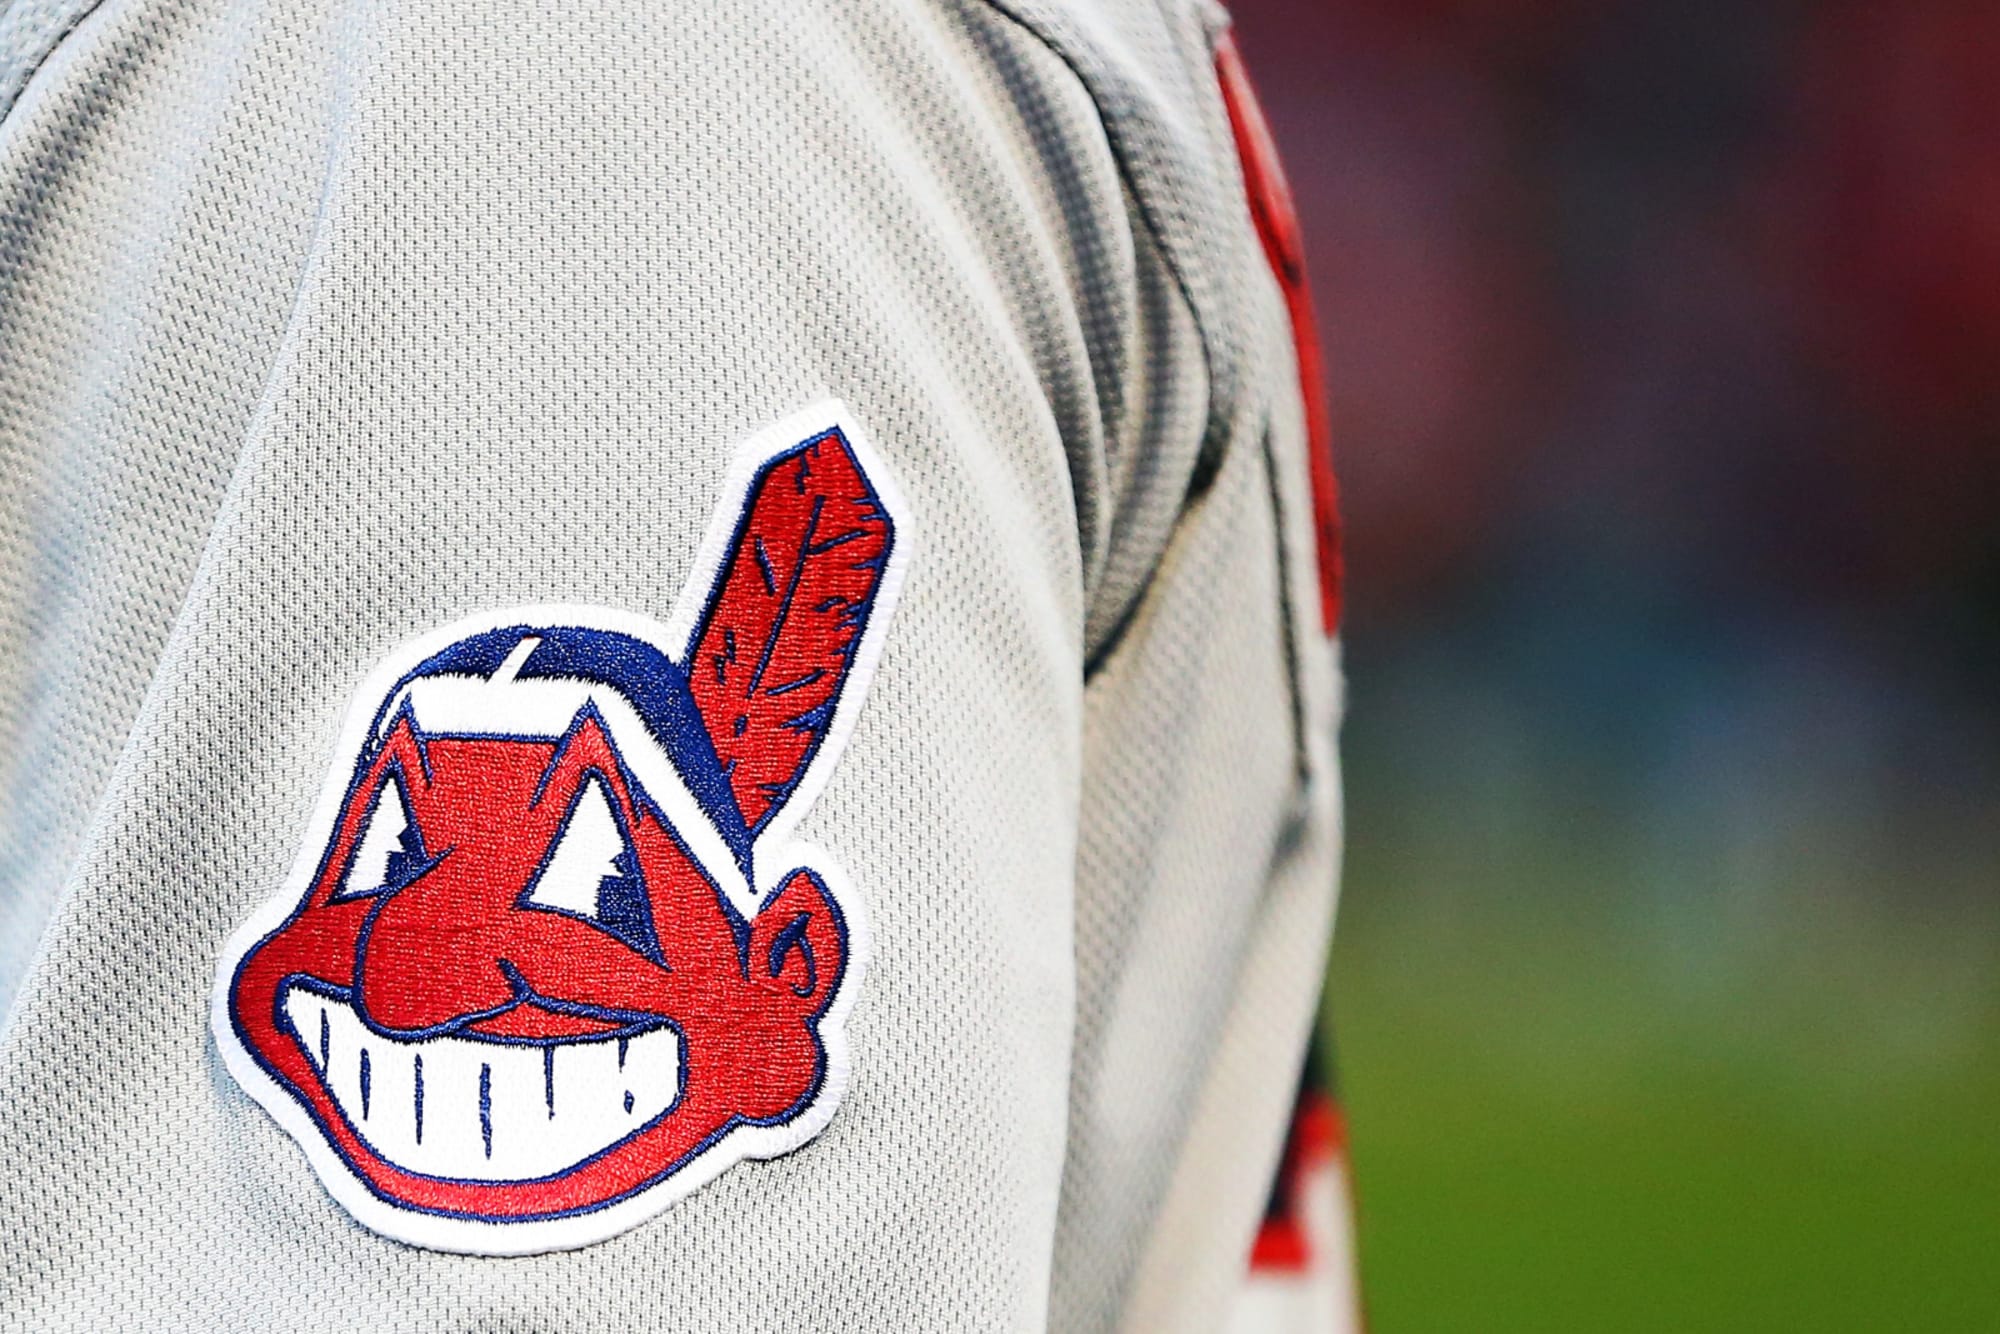  Page2 - Cleveland Indians' new uniforms